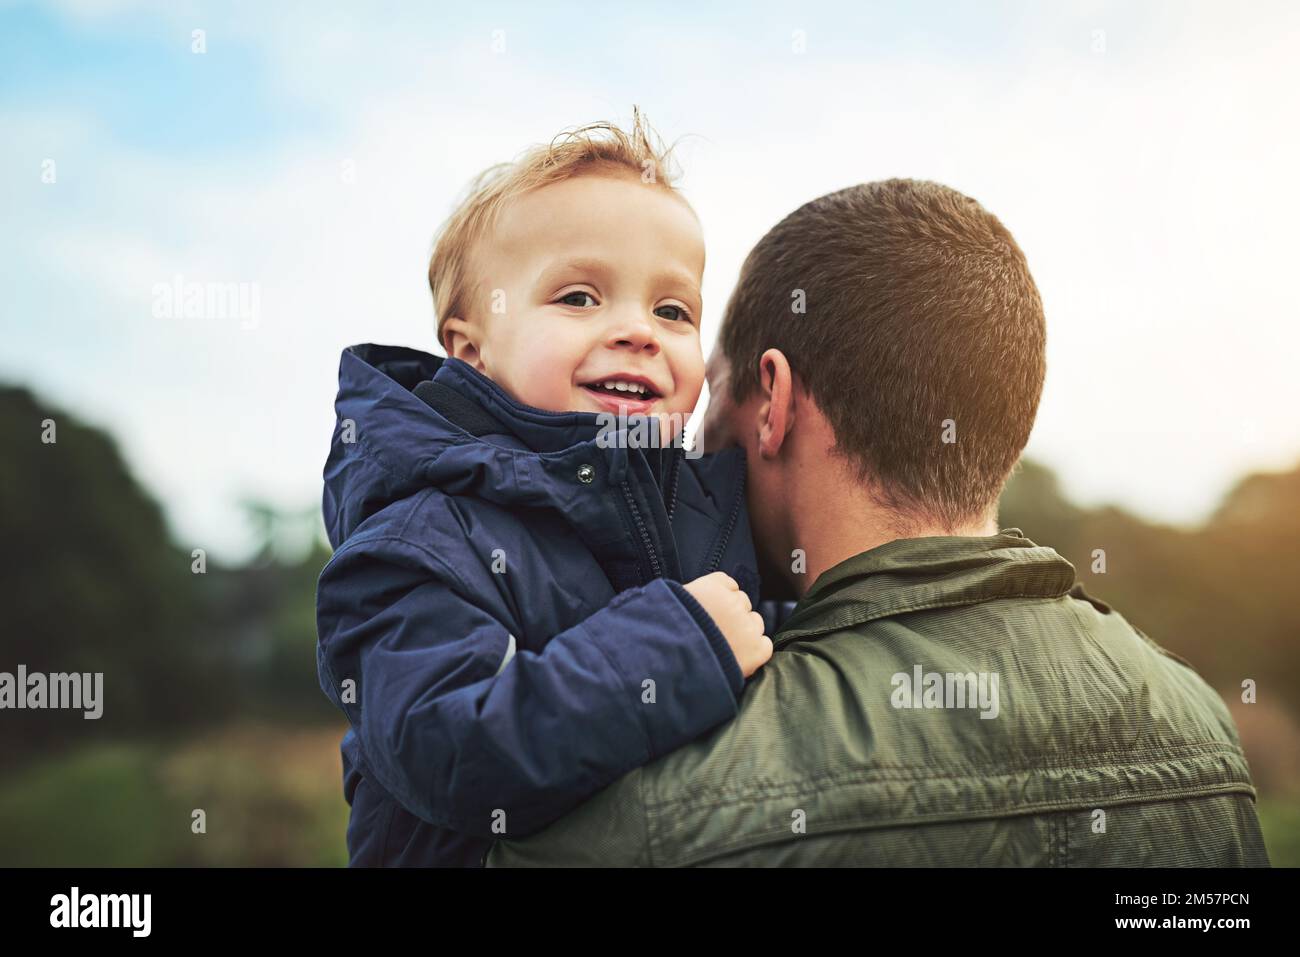 Were off to the park. a father bonding with his son outside. Stock Photo